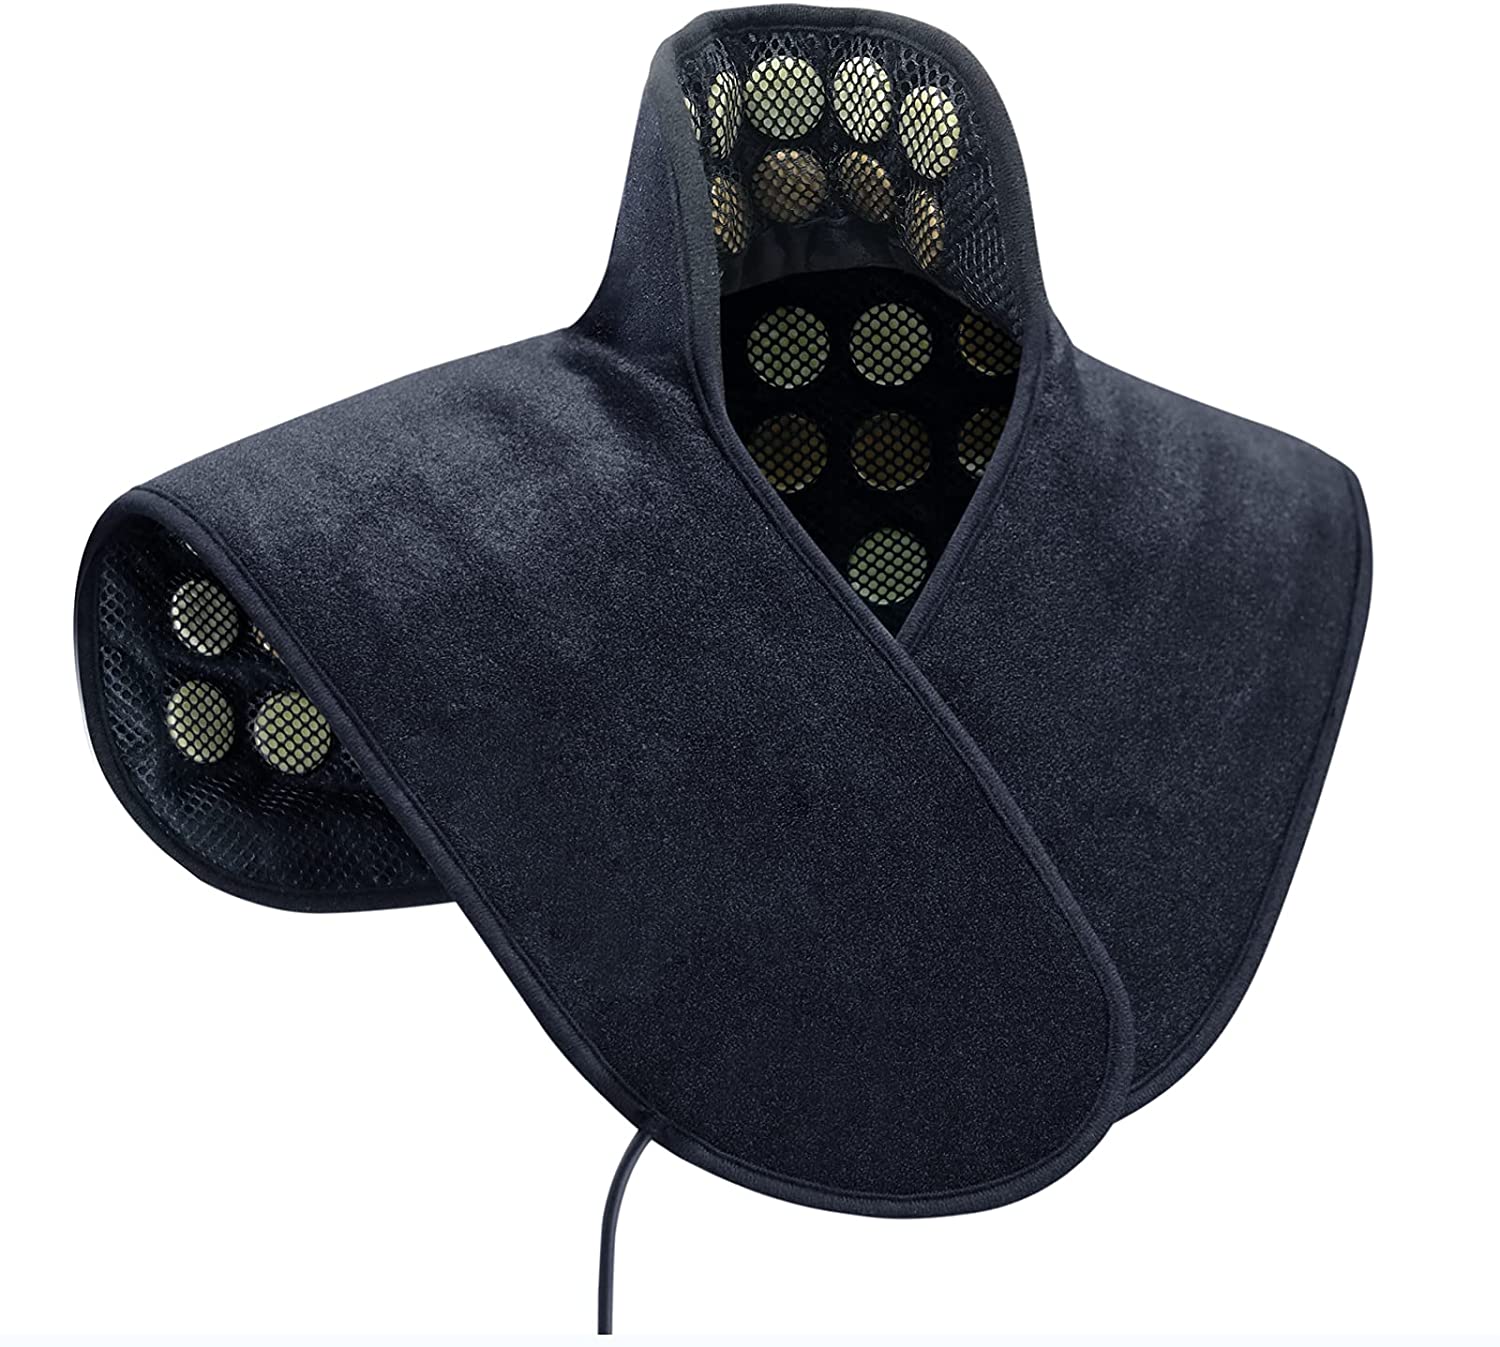 How to Choose the Best Infrared Heating Pad for Neck? 1